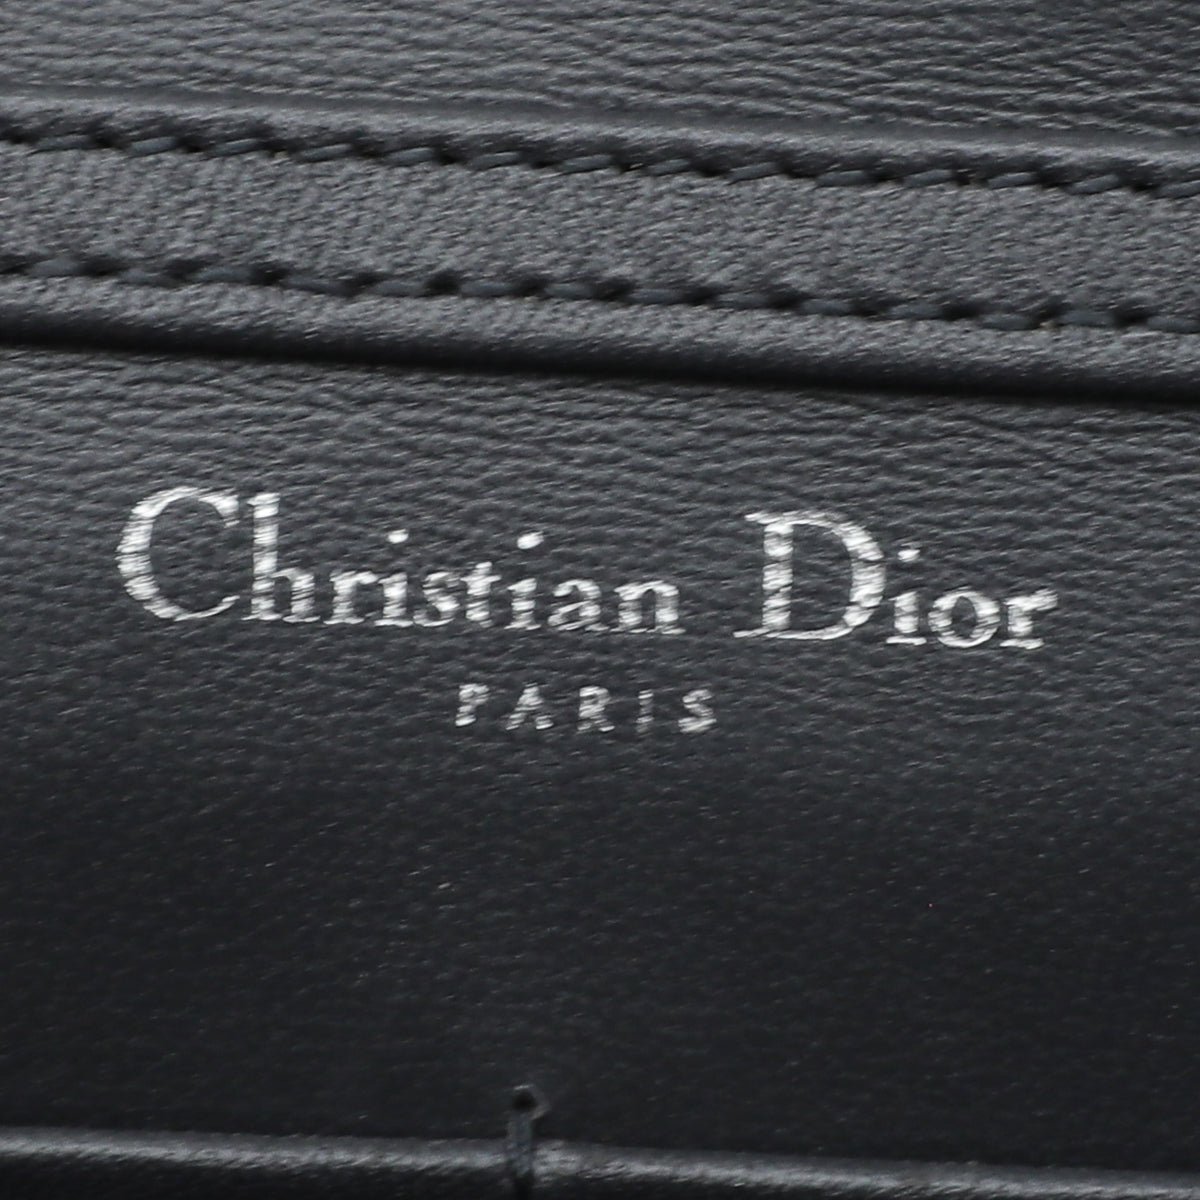 Christian Dior Light Pink Microcannage Diorama Wallet On Chain